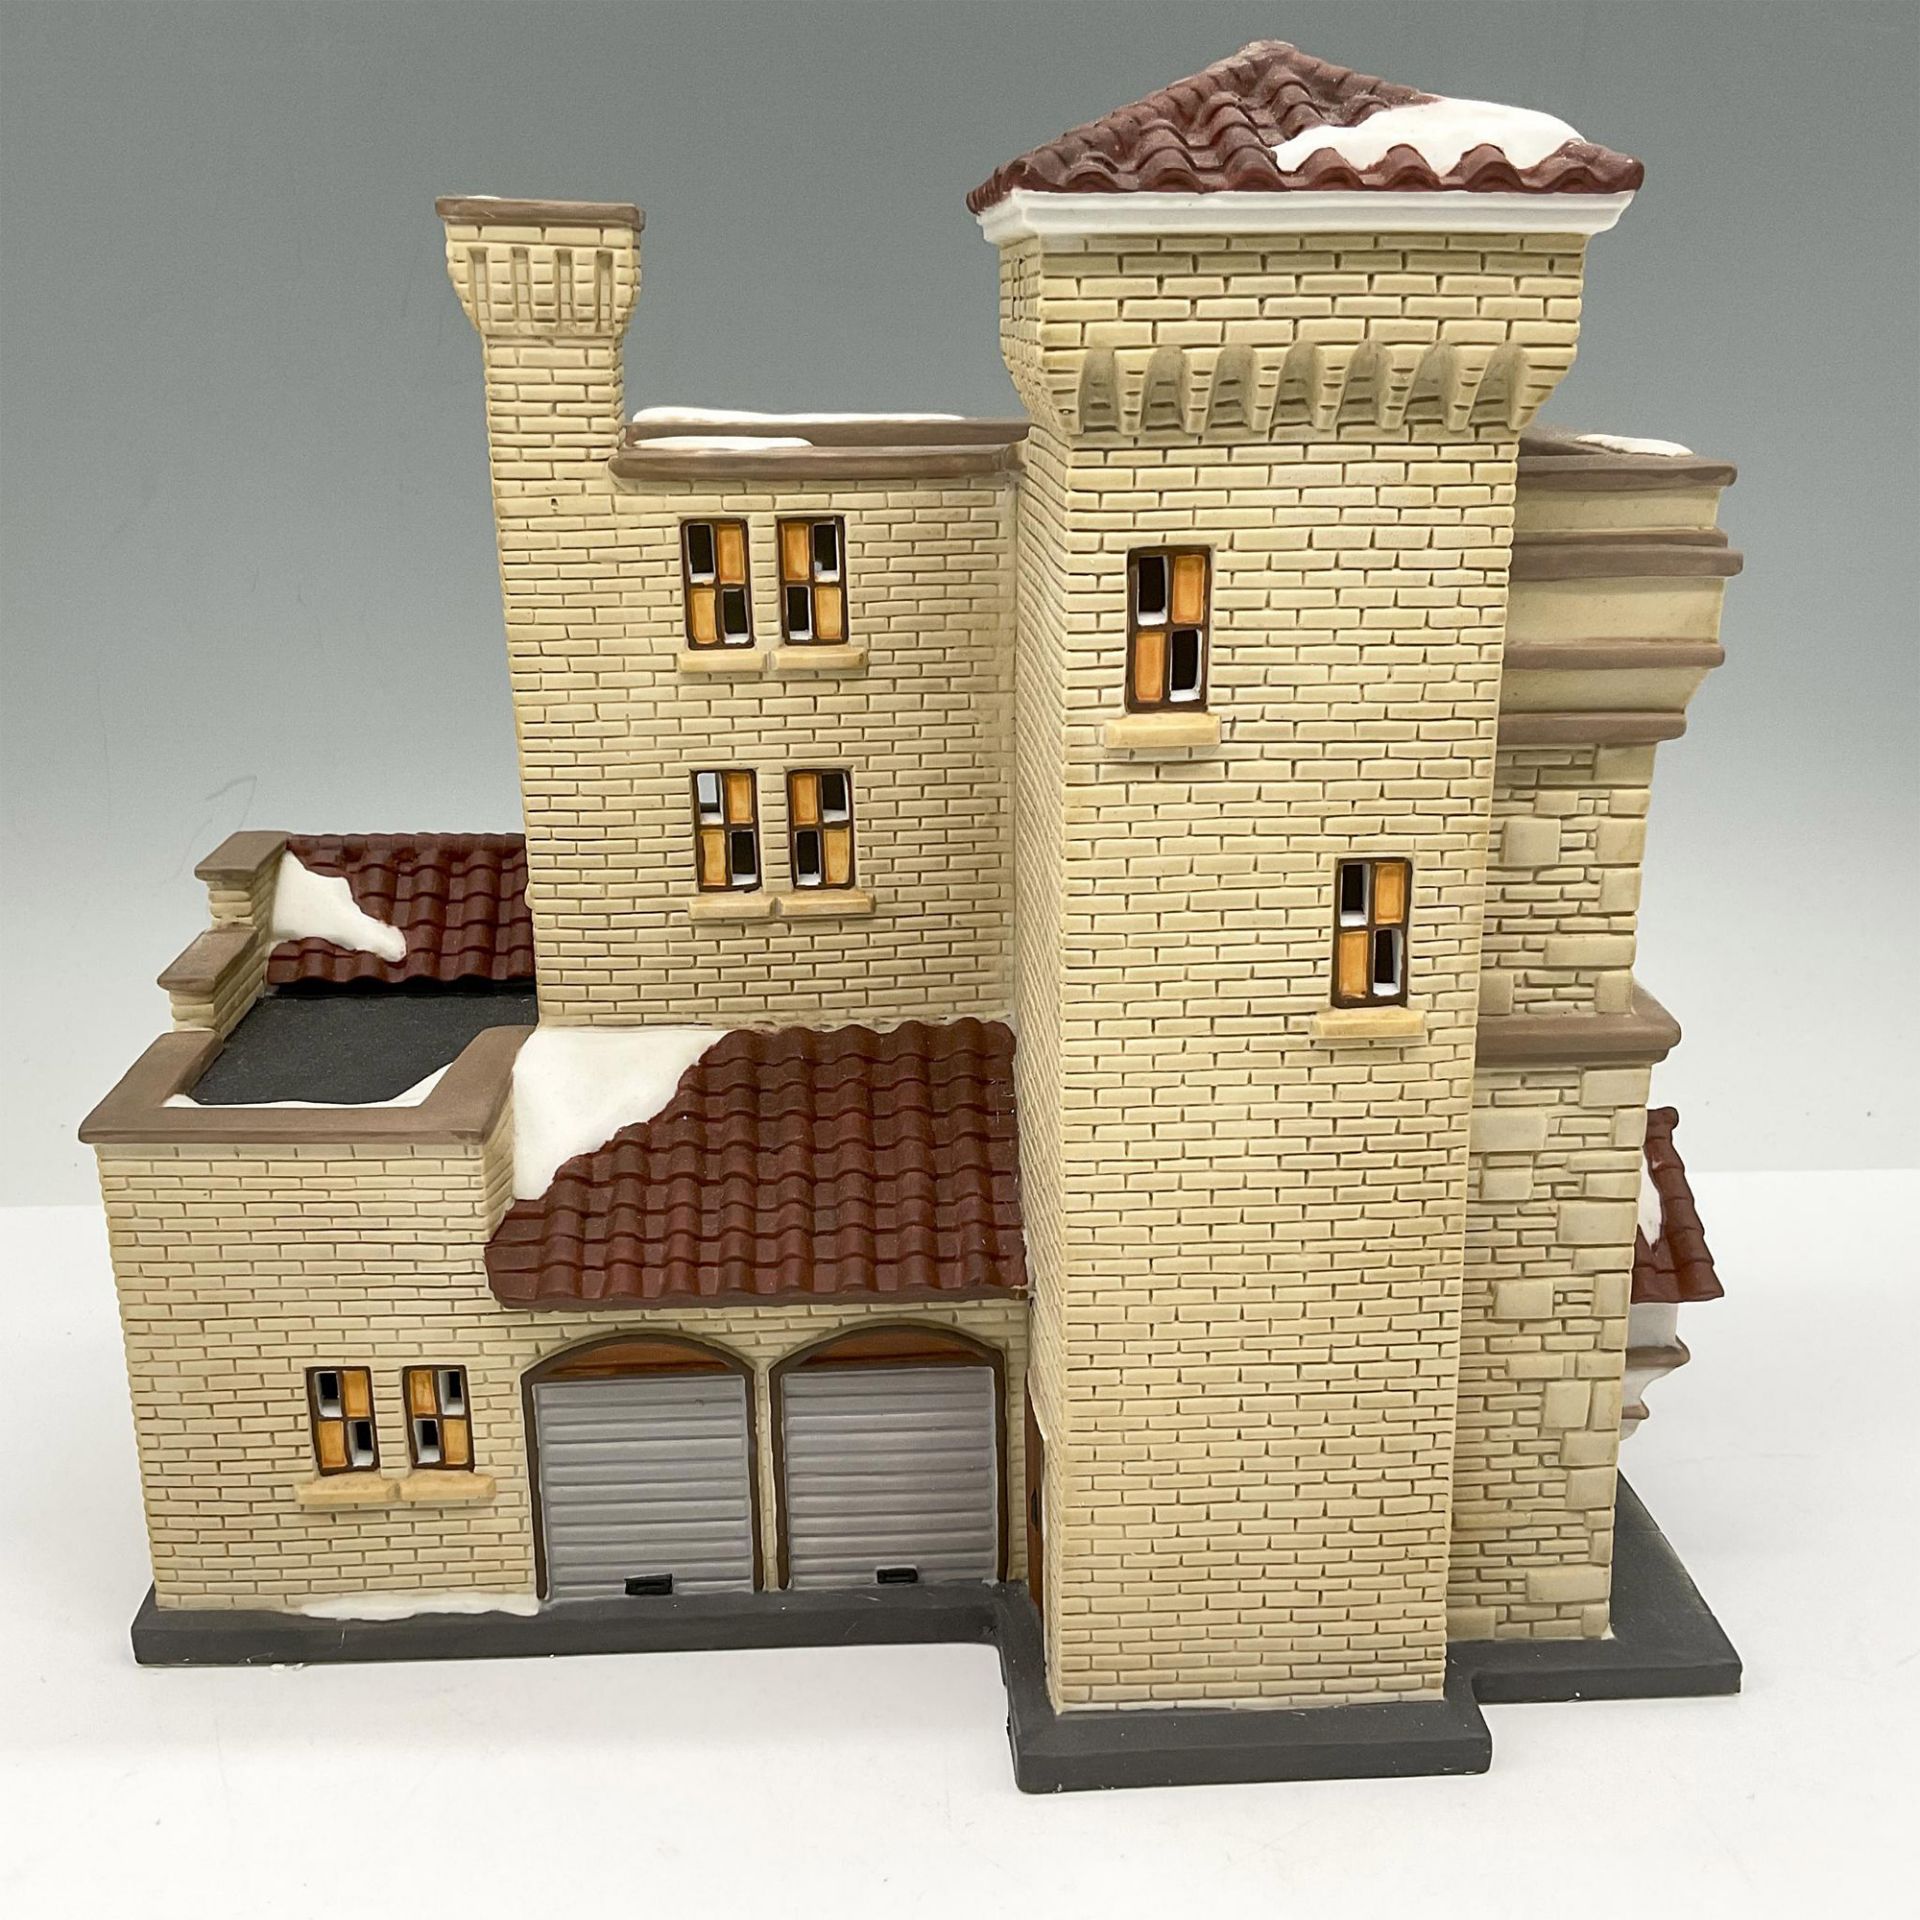 Department 56 Porcelain Anniversary Event Edition - Image 4 of 6